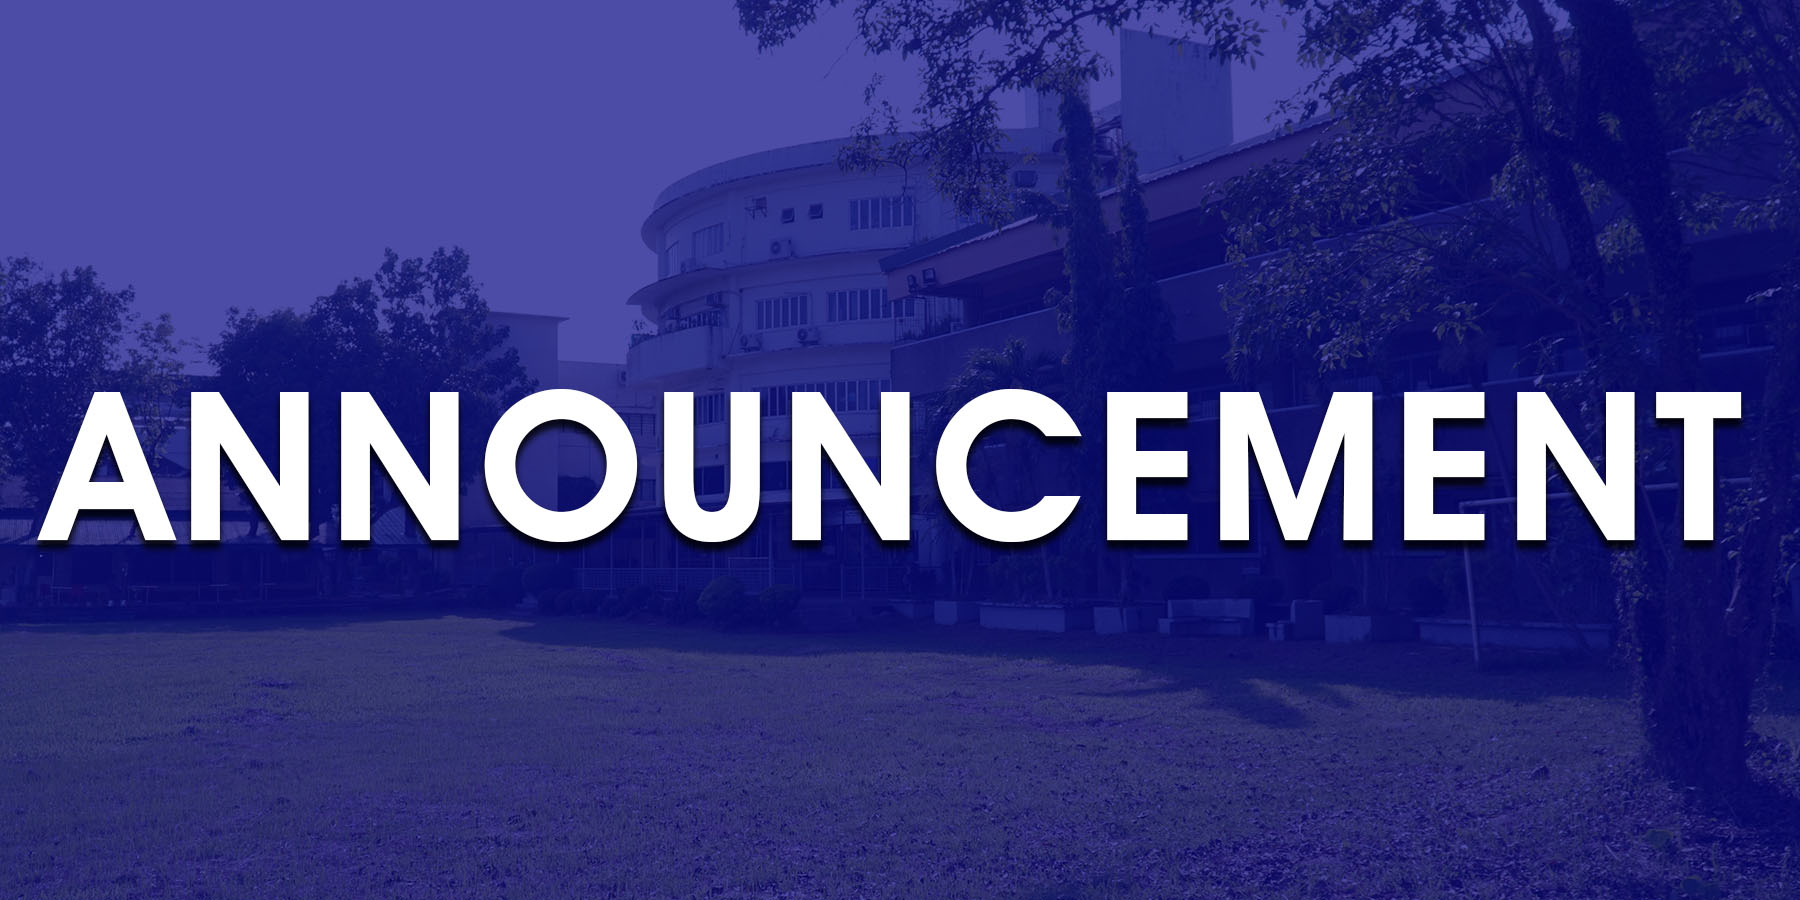 Bachelor of Public Administration Program will open soon after CHED Approval